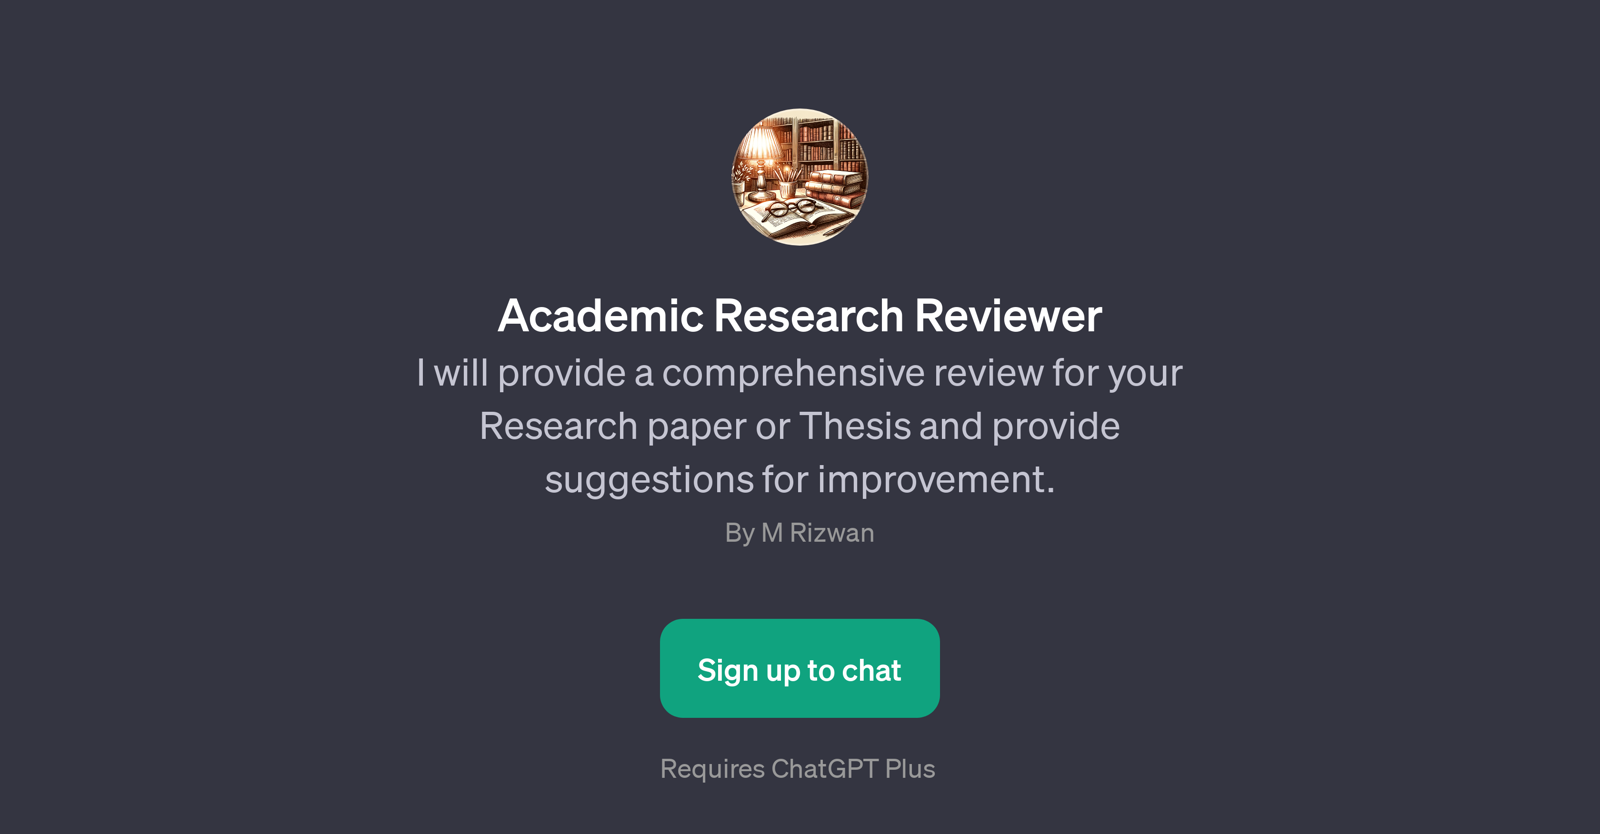 Academic Research Reviewer website